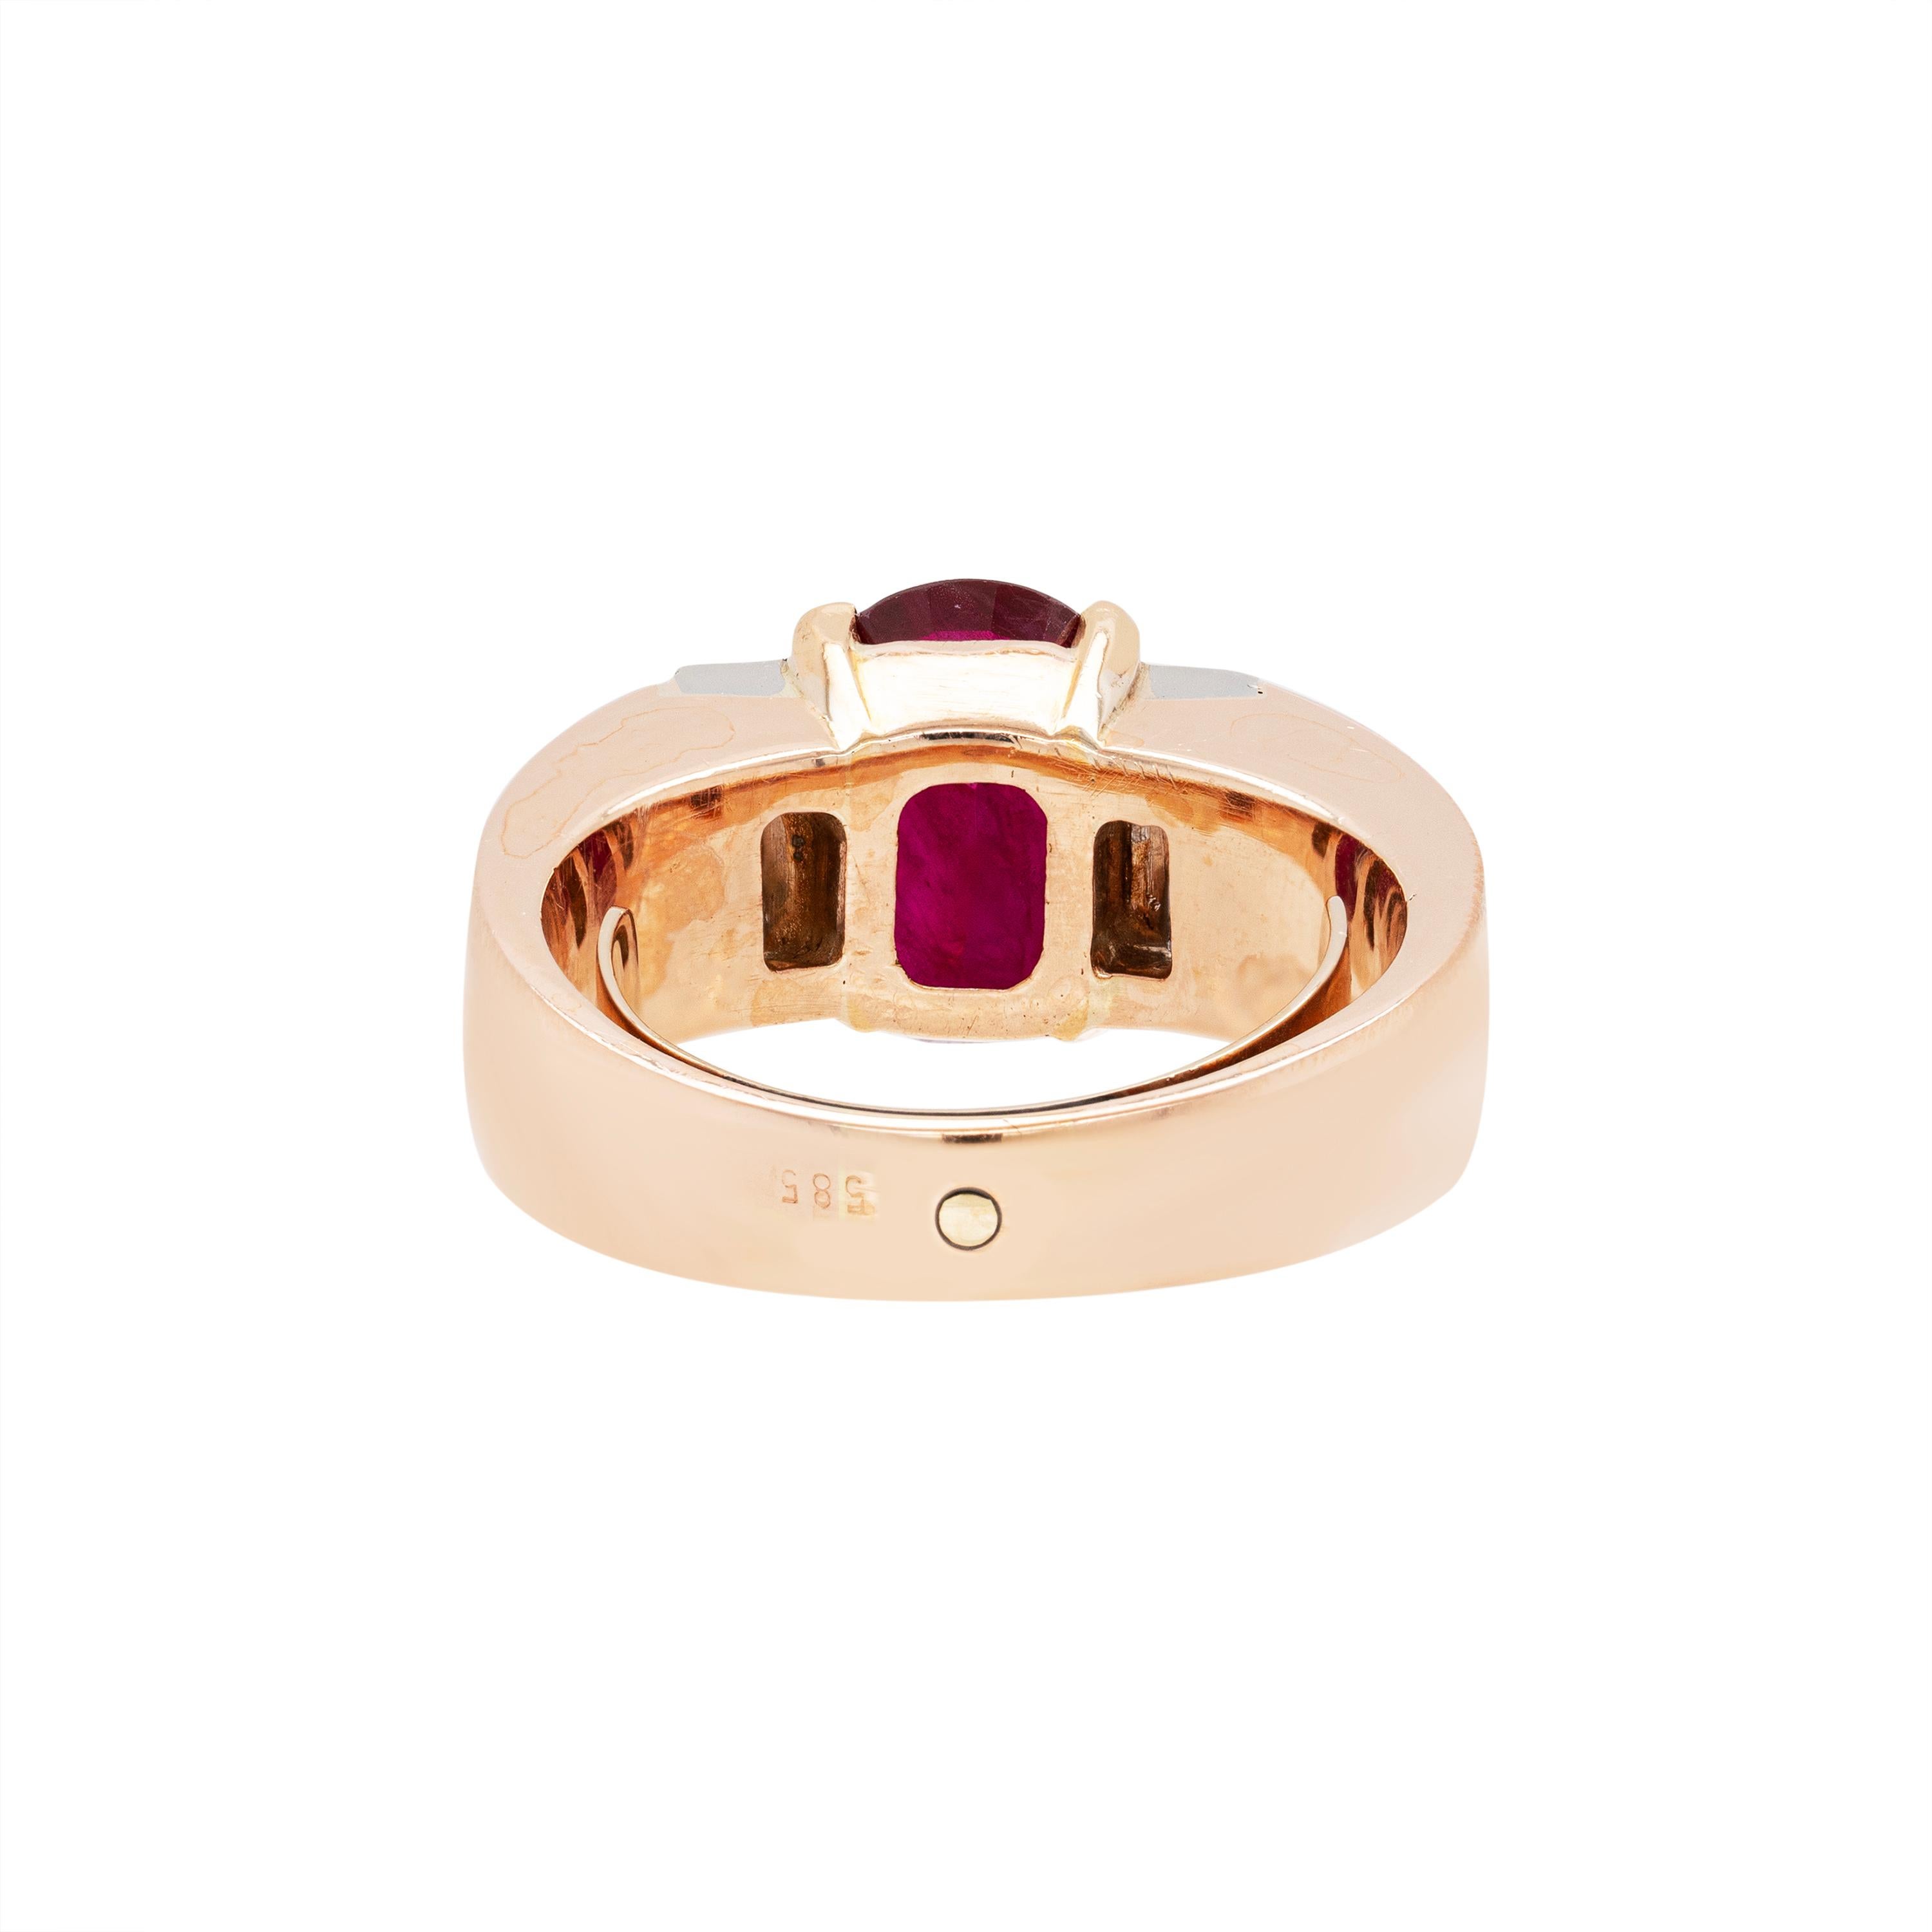 Oval Cut 2.60 Carat Ruby and Diamond 18 Carat Yellow Gold Ring, circa 1960s For Sale